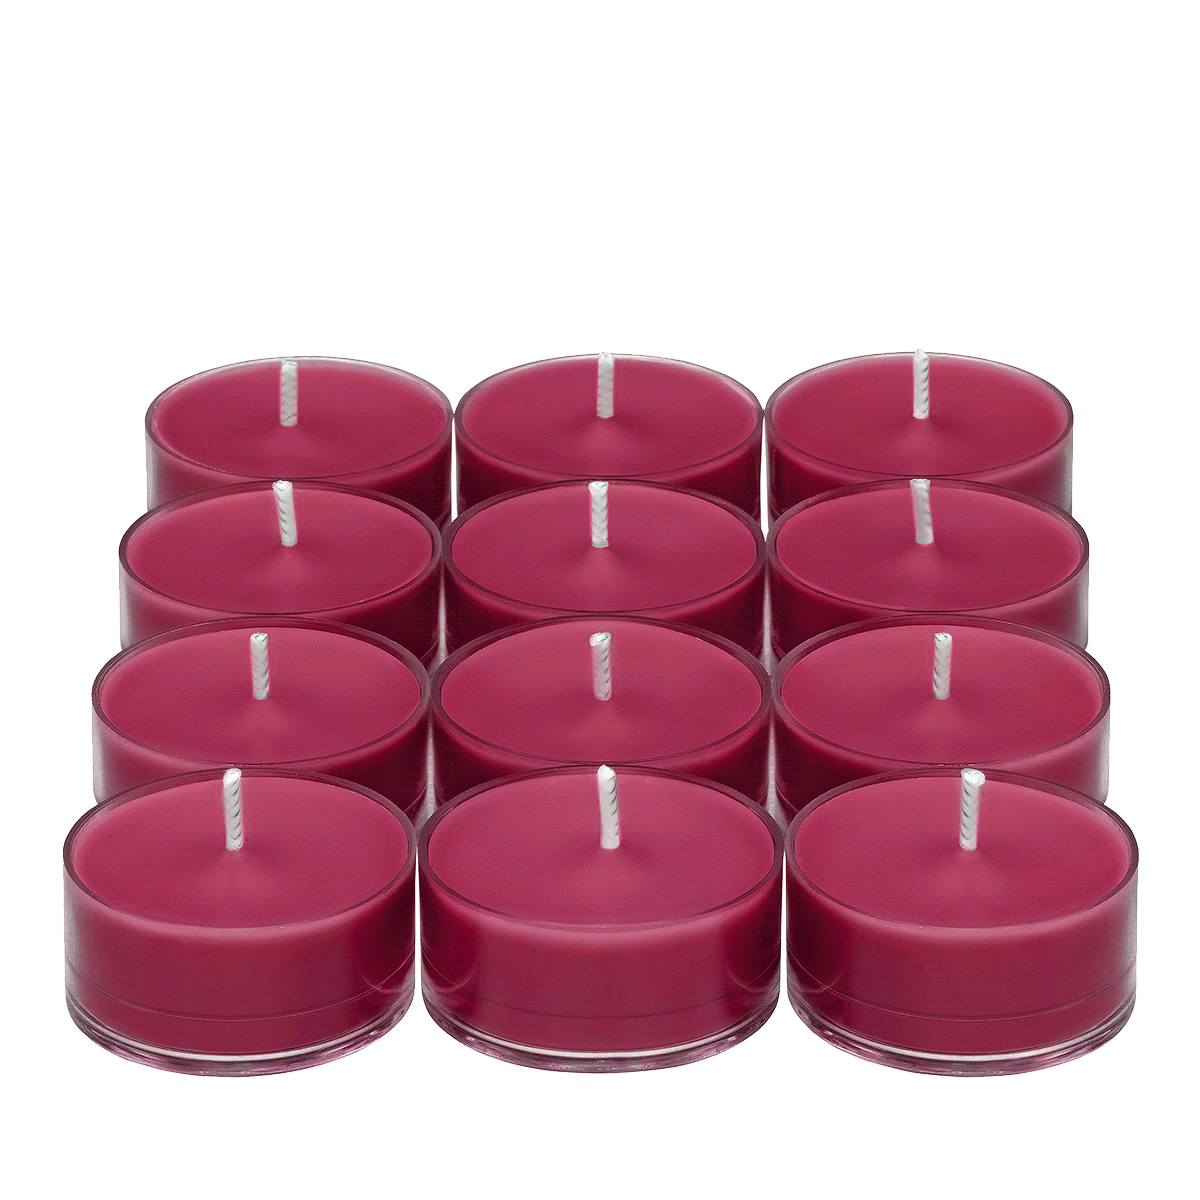 After Dark™ Cashmere Cassis Universal Scented Purple Tealight® Candles - PartyLite US